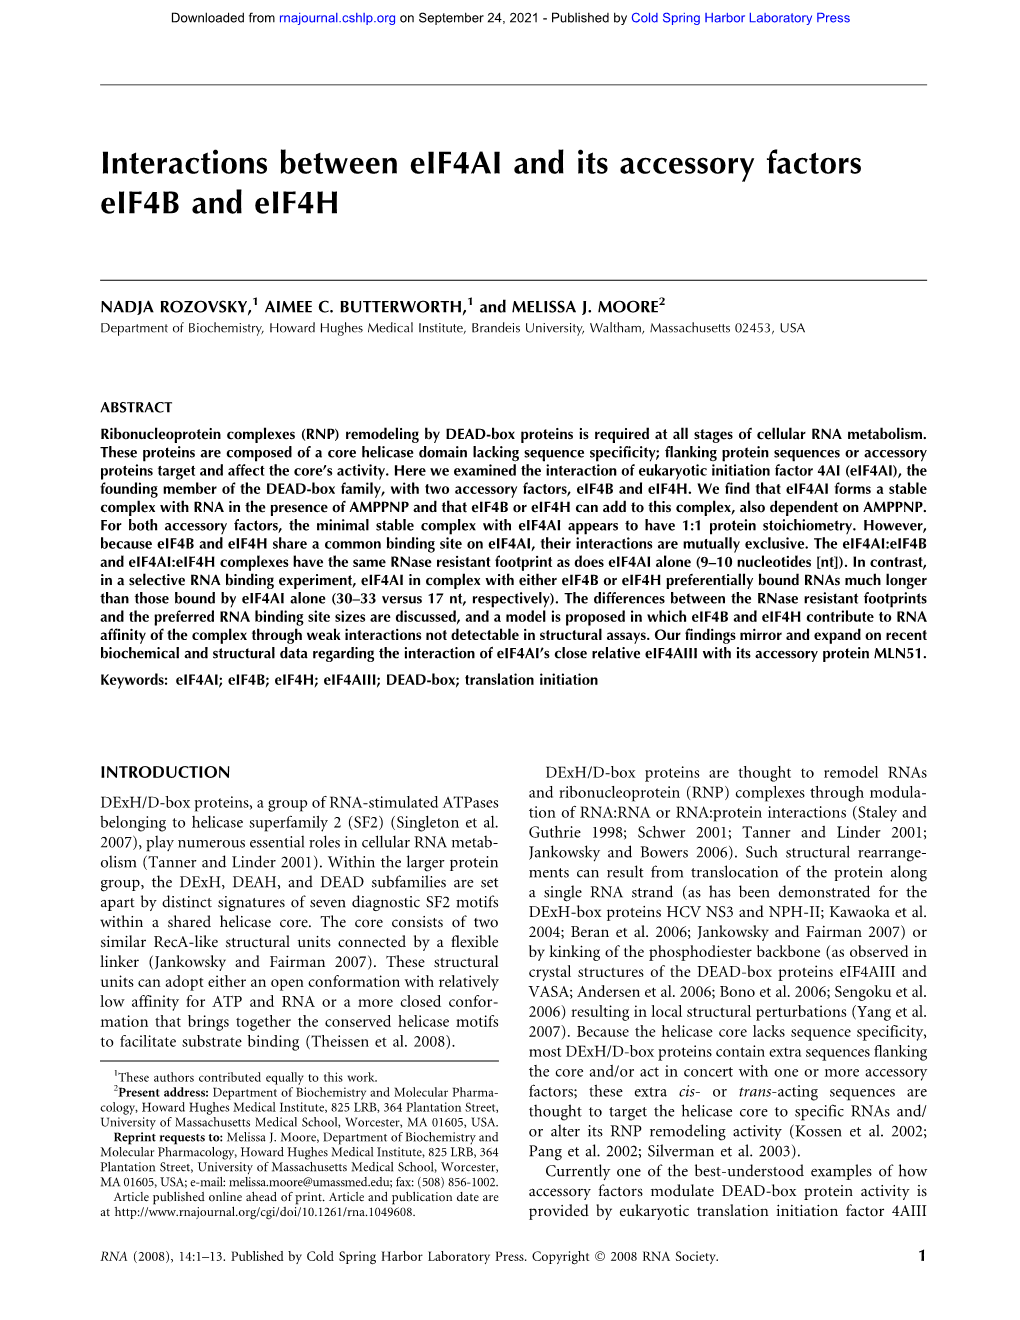 Interactions Between Eif4ai and Its Accessory Factors Eif4b and Eif4h